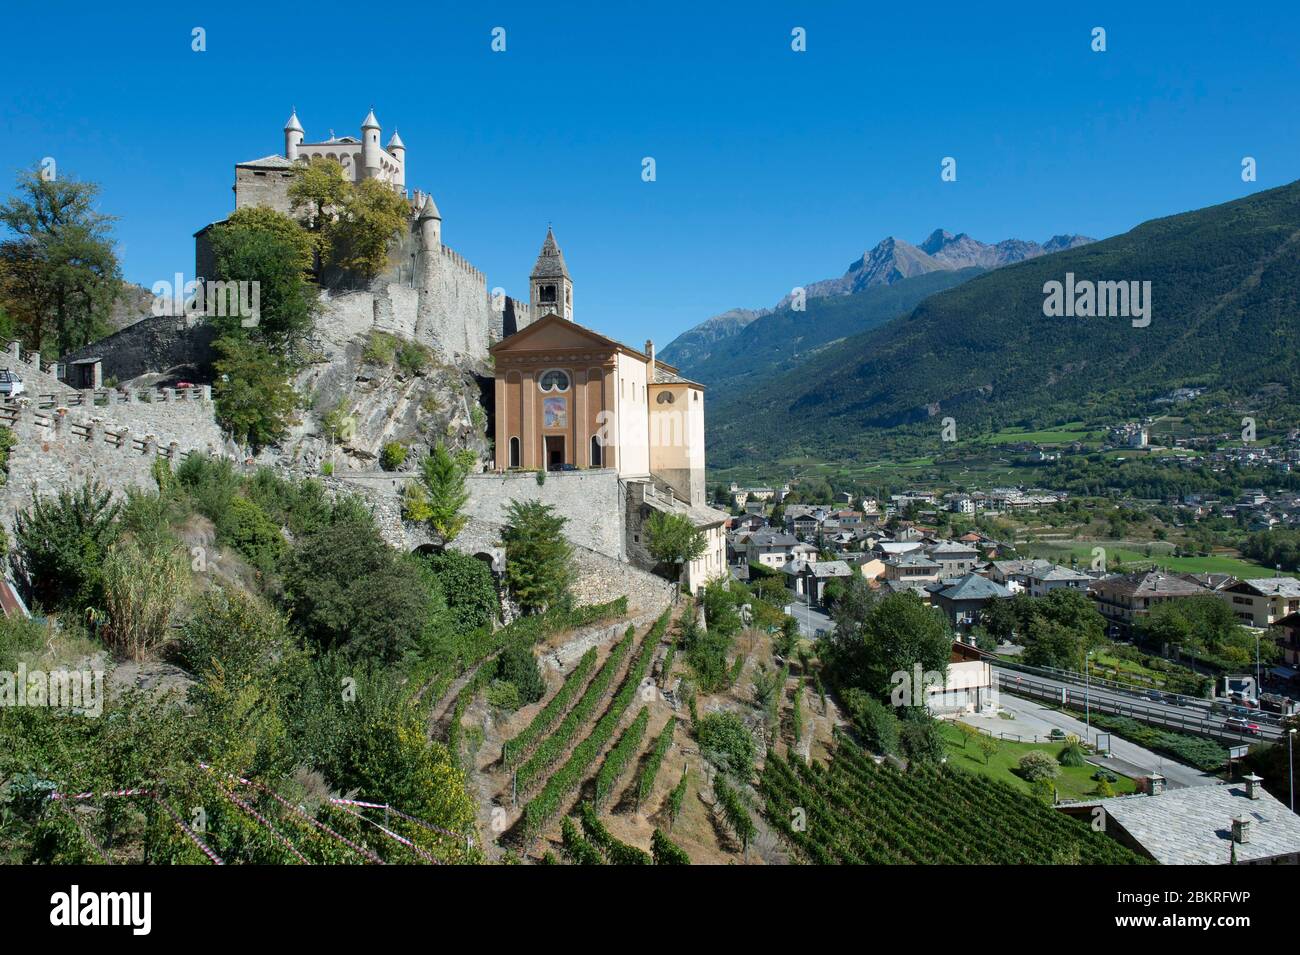 Italy, Aosta Valley, the castle and the Church of Saint Peter surrounded by vineyards dominate the Dora Baltea valley Stock Photo